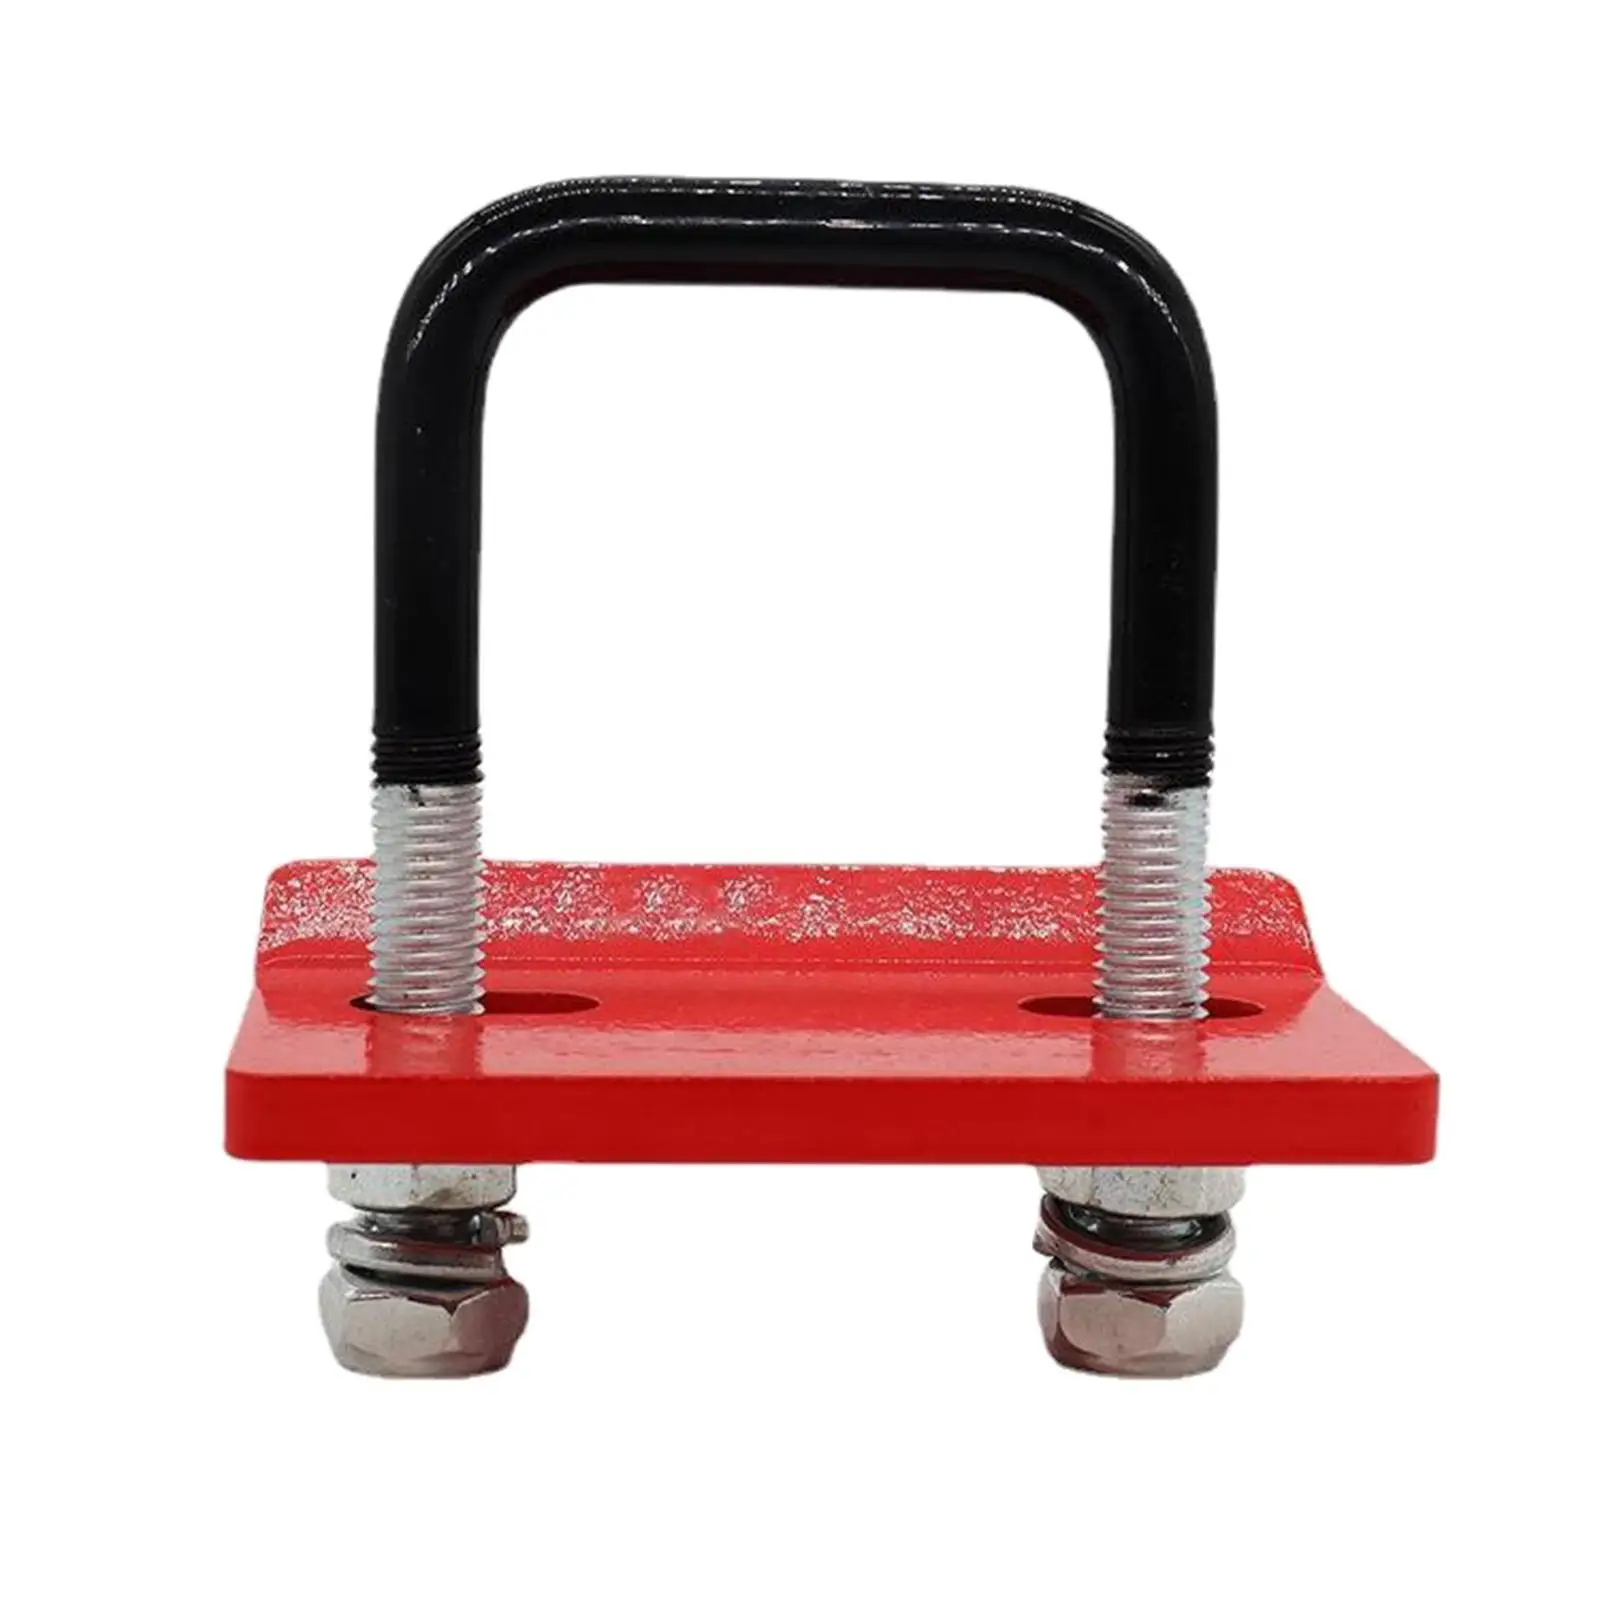 Hitch Tightener Trailer Hitches Clamp for Trailer Hitch Tray Bike Rack